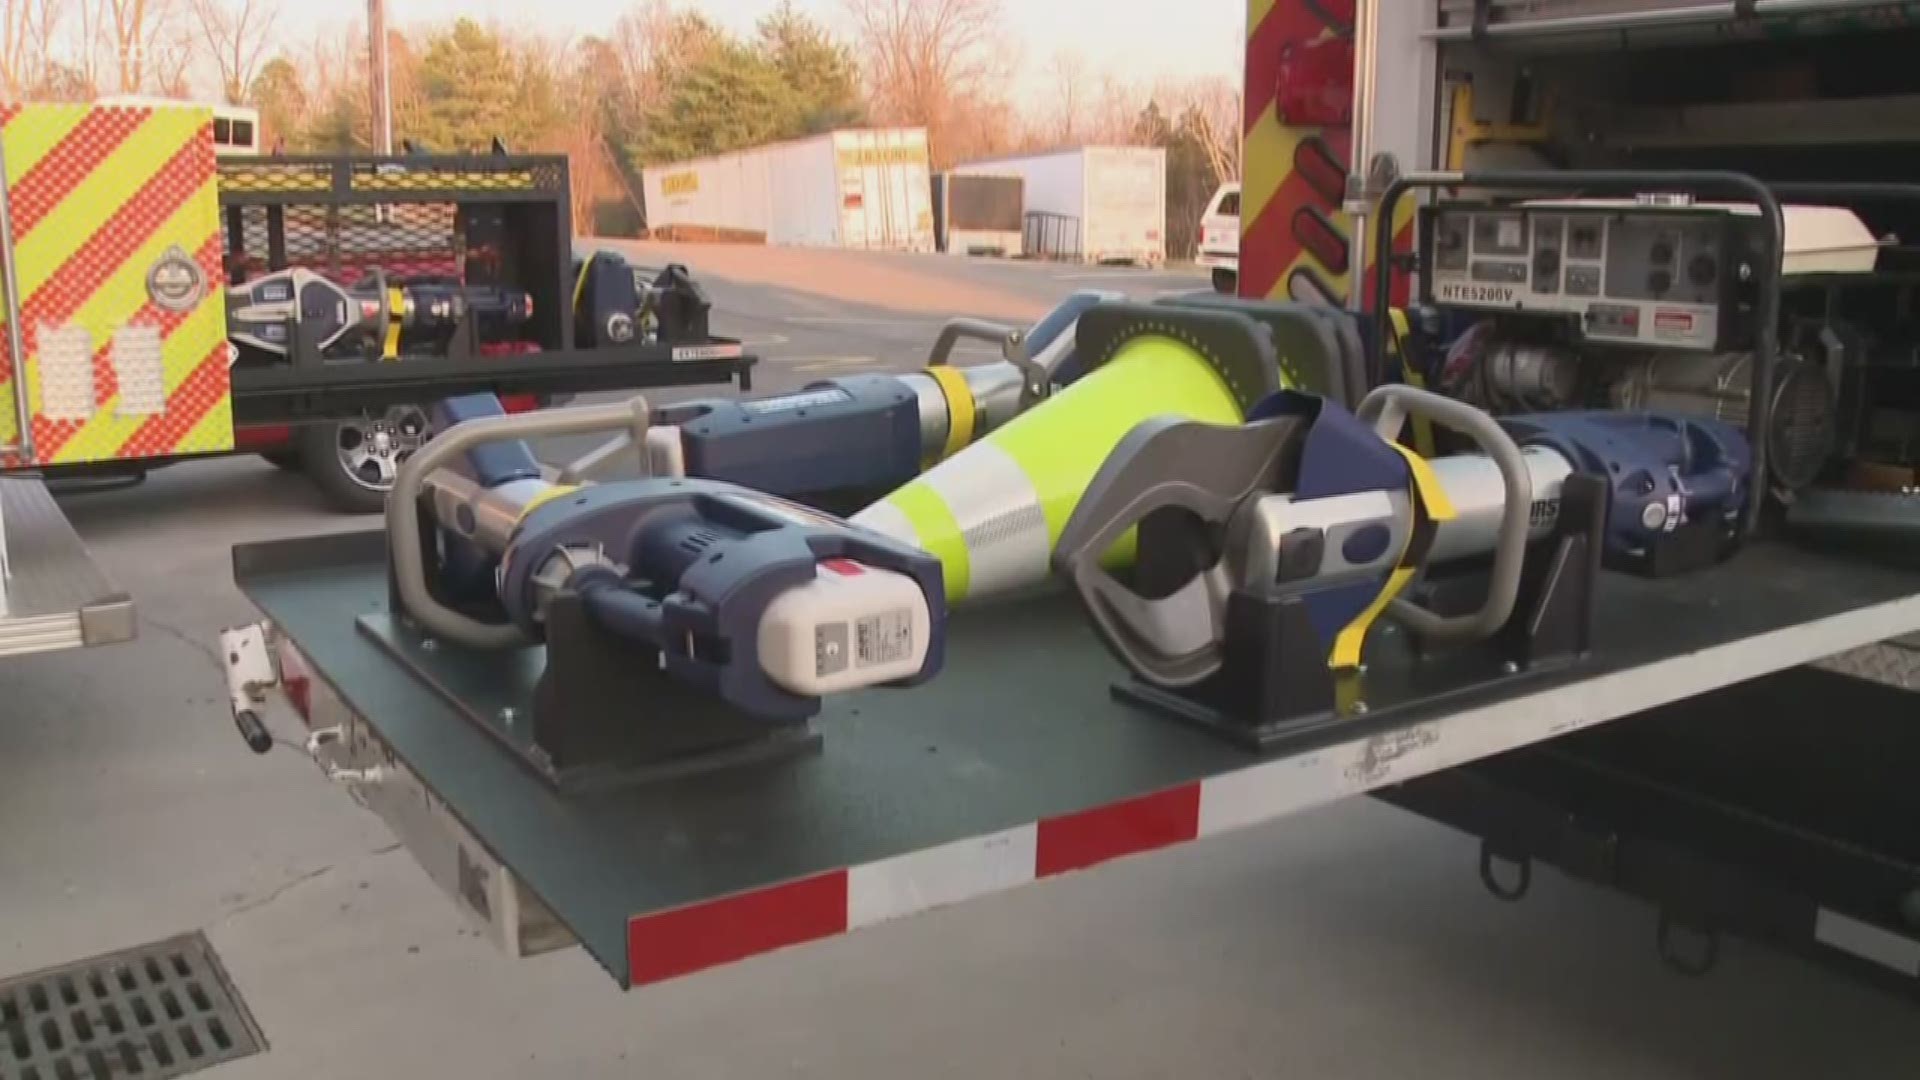 Emergency responders in Jefferson County are getting new life-saving tools thanks to donations.